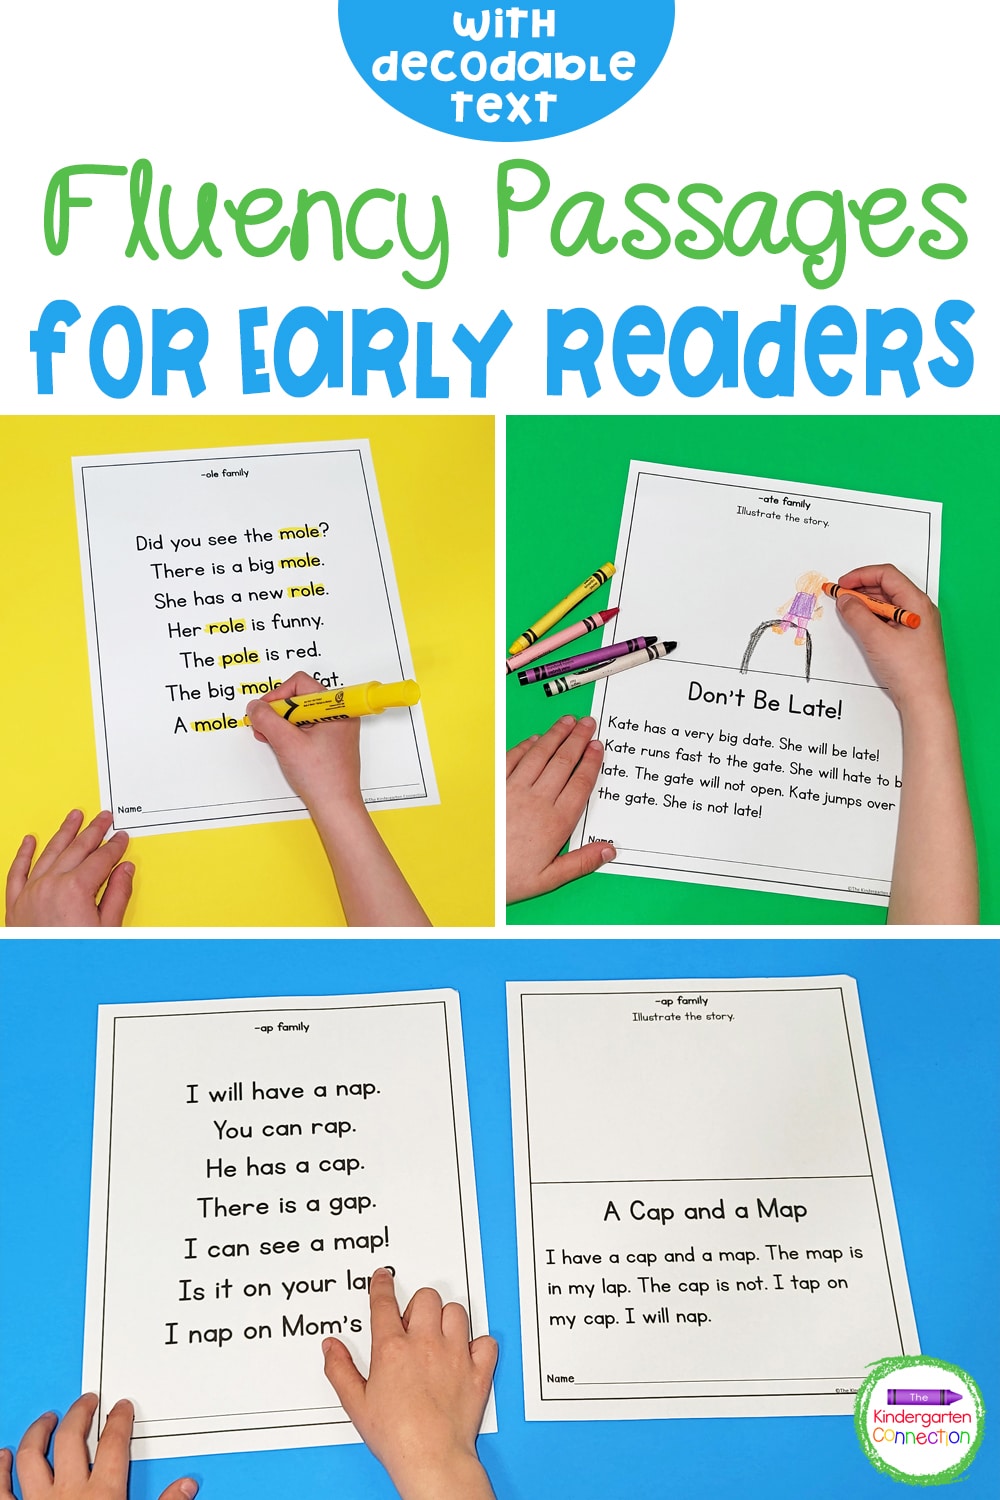 Fluency Passages for Early Readers